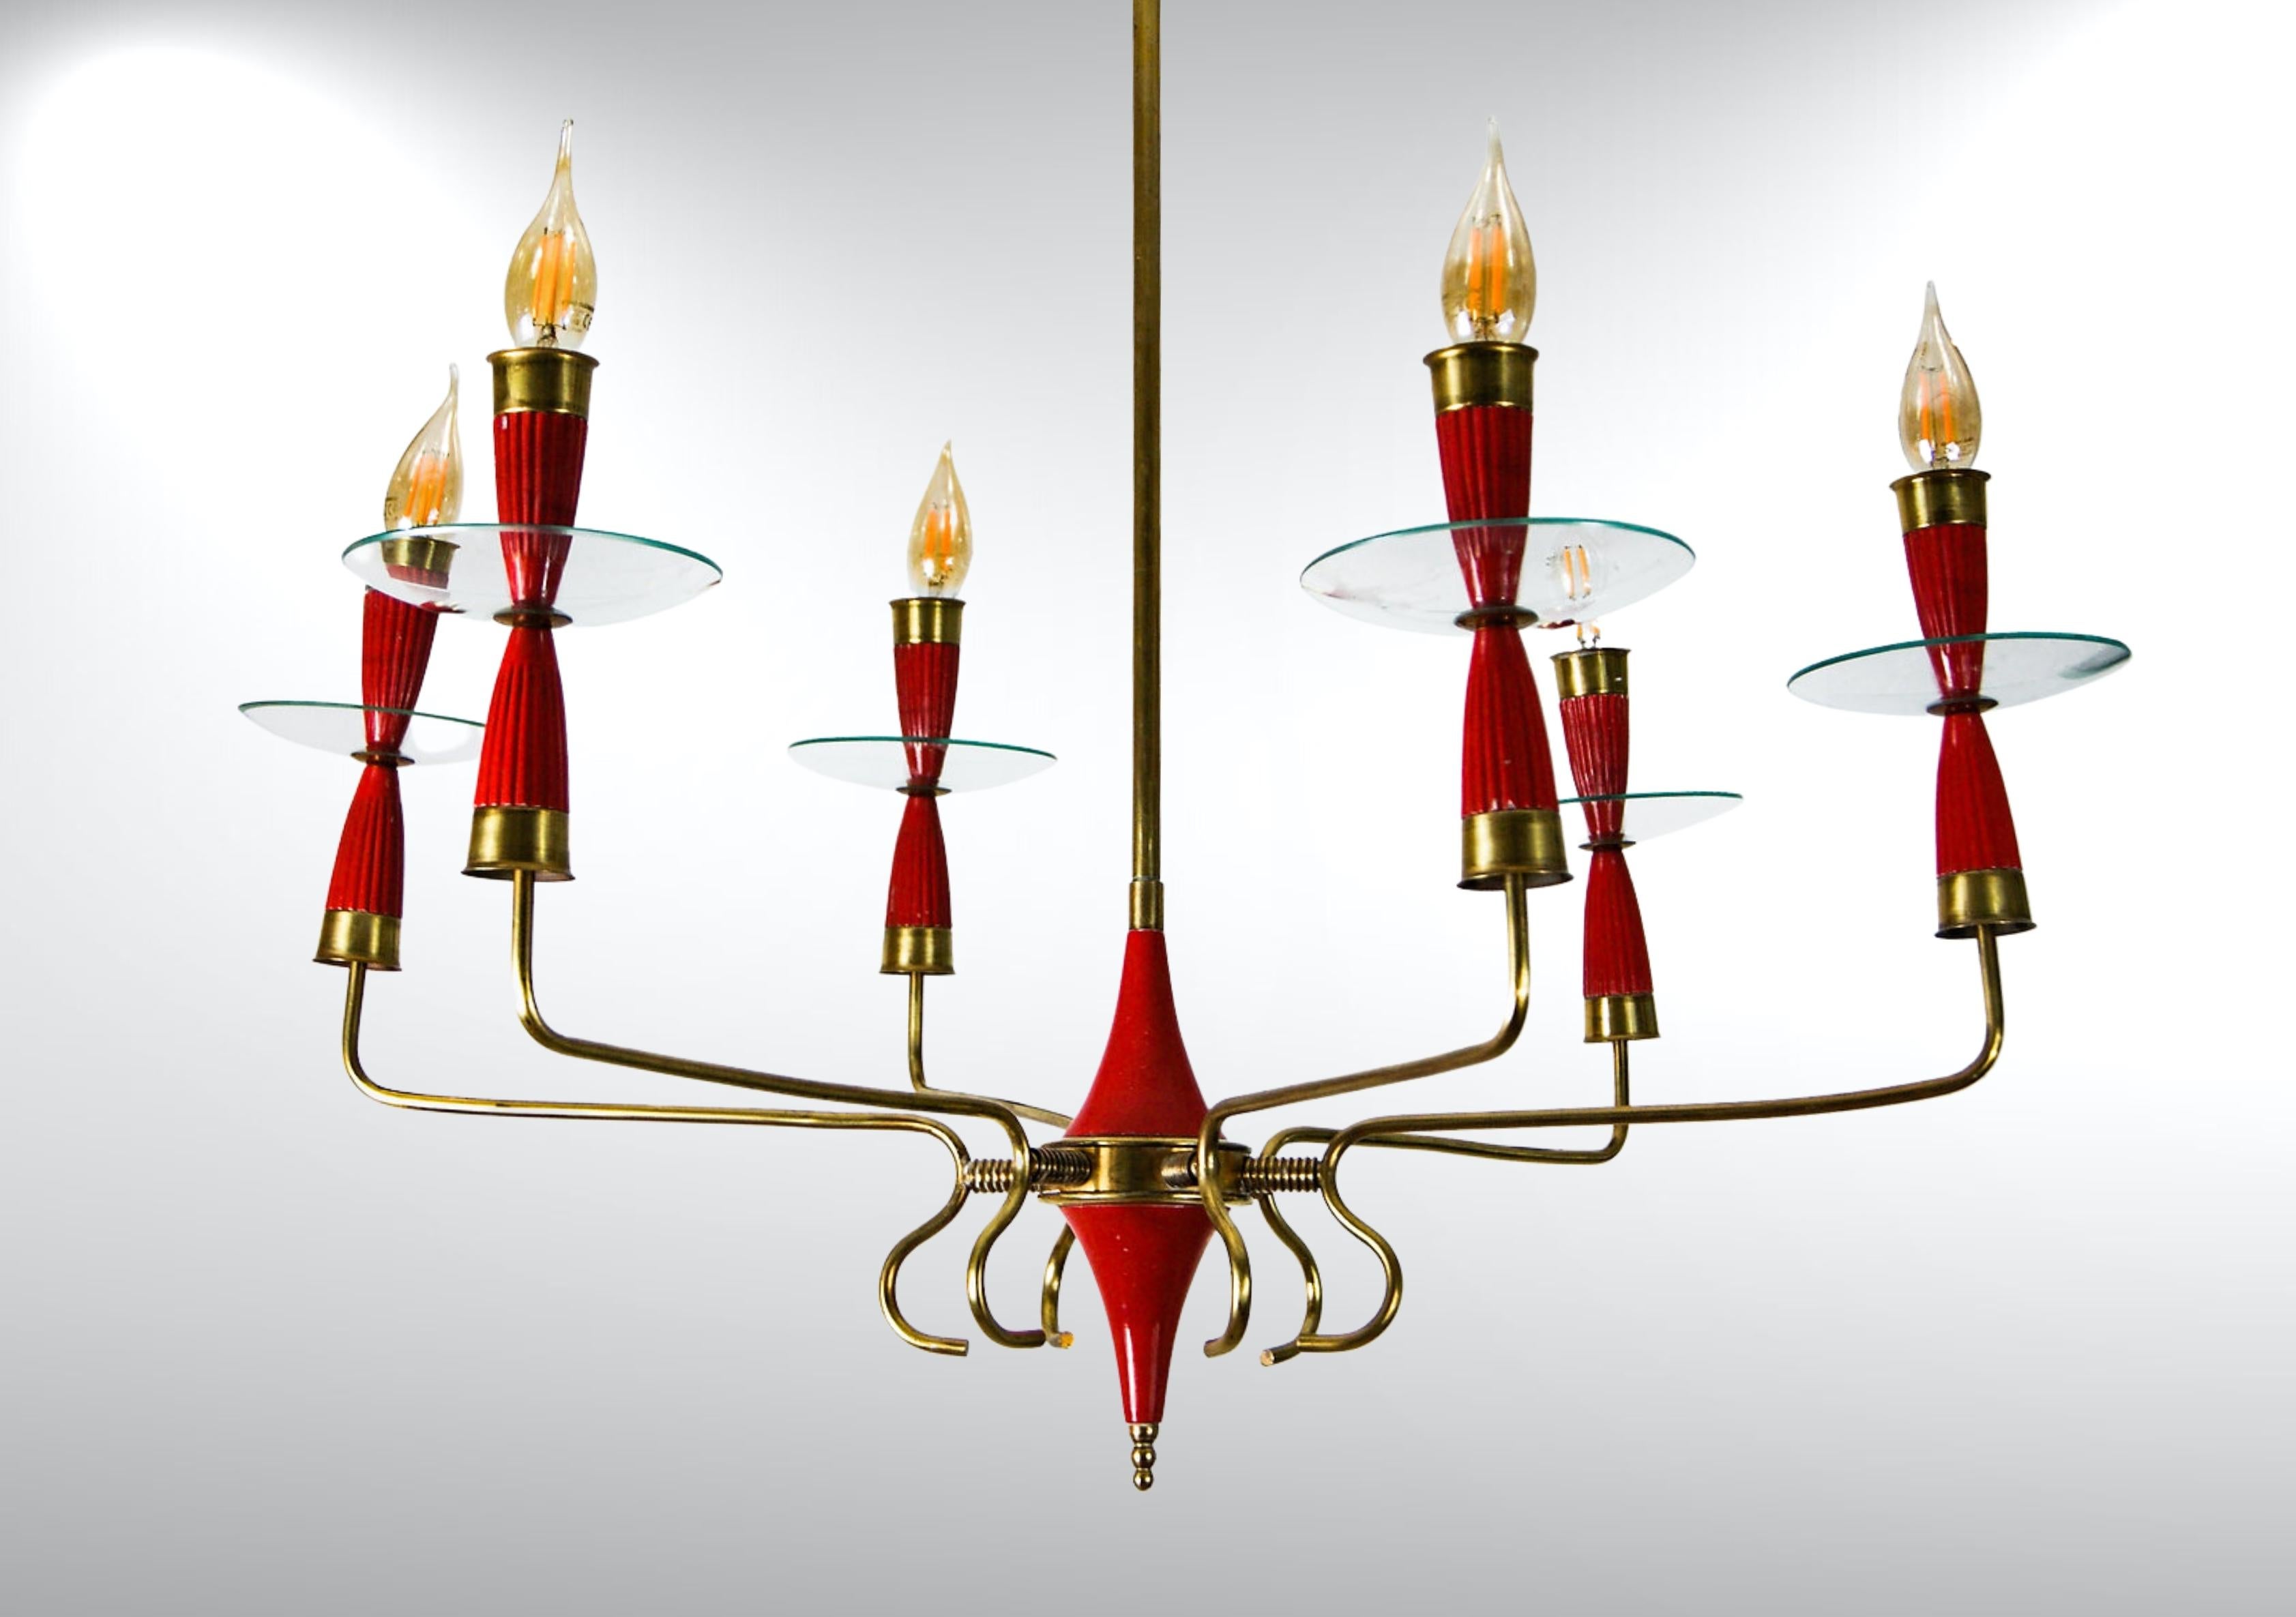 Mid-Century Italian enamelled brass and glass chandelier from the early 1940s.
Attributed to Pietro Chiesa for Fontana Arte.
Featuring 6 slender brass arms, with delicate venetian glass diffuser cups and long red enamelled candle shaped lamp